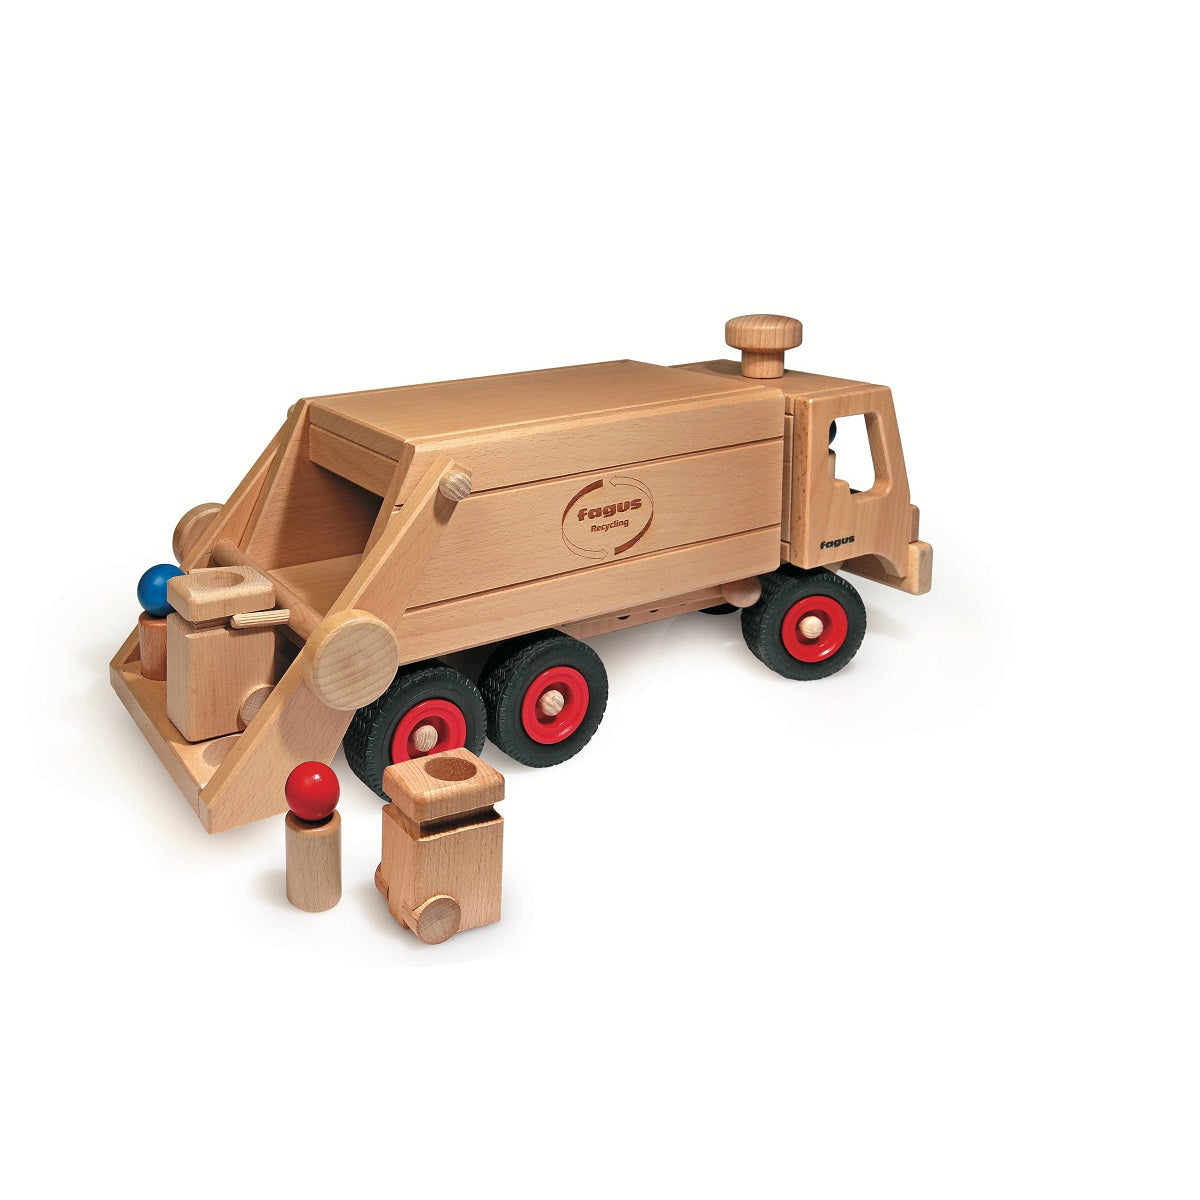 Fagus Recycling / Garbage Truck